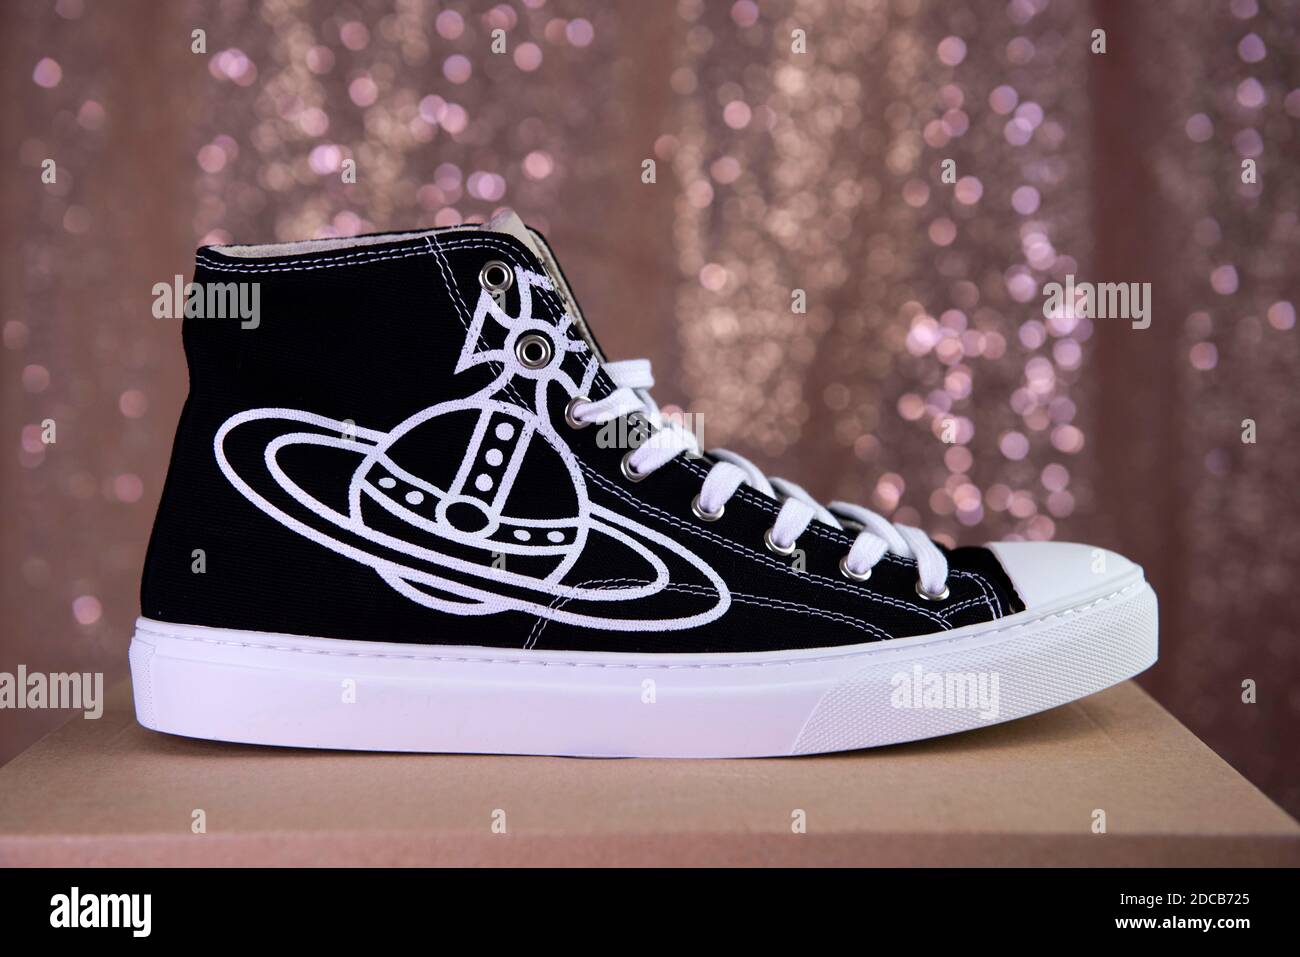 Vivienne Westwood vegan Plimsoll high top trainers with Orb logo design. Stock Photo